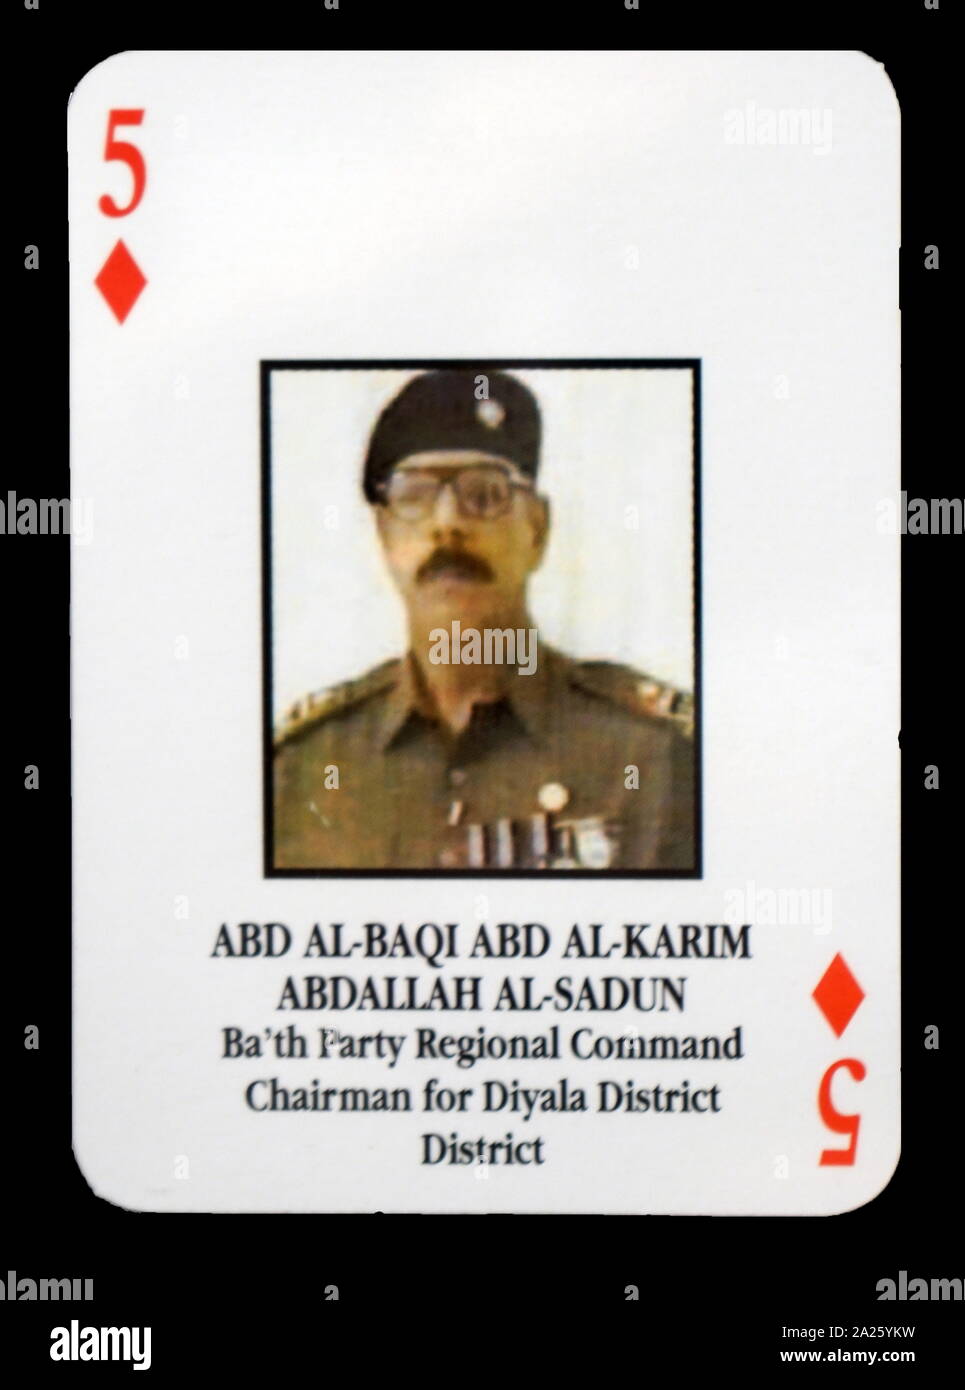 Most-wanted Iraqi playing cards - Abd Al-Baqi Al-Karim Abdallah Al-Sadun (Ba'th Party Regional Command Chairman for Diyala District). The U.S. military developed a set of playing cards to help troop identify the most-wanted members of President Saddam Hussein's government during the 2003 invasion of Iraq. Stock Photo